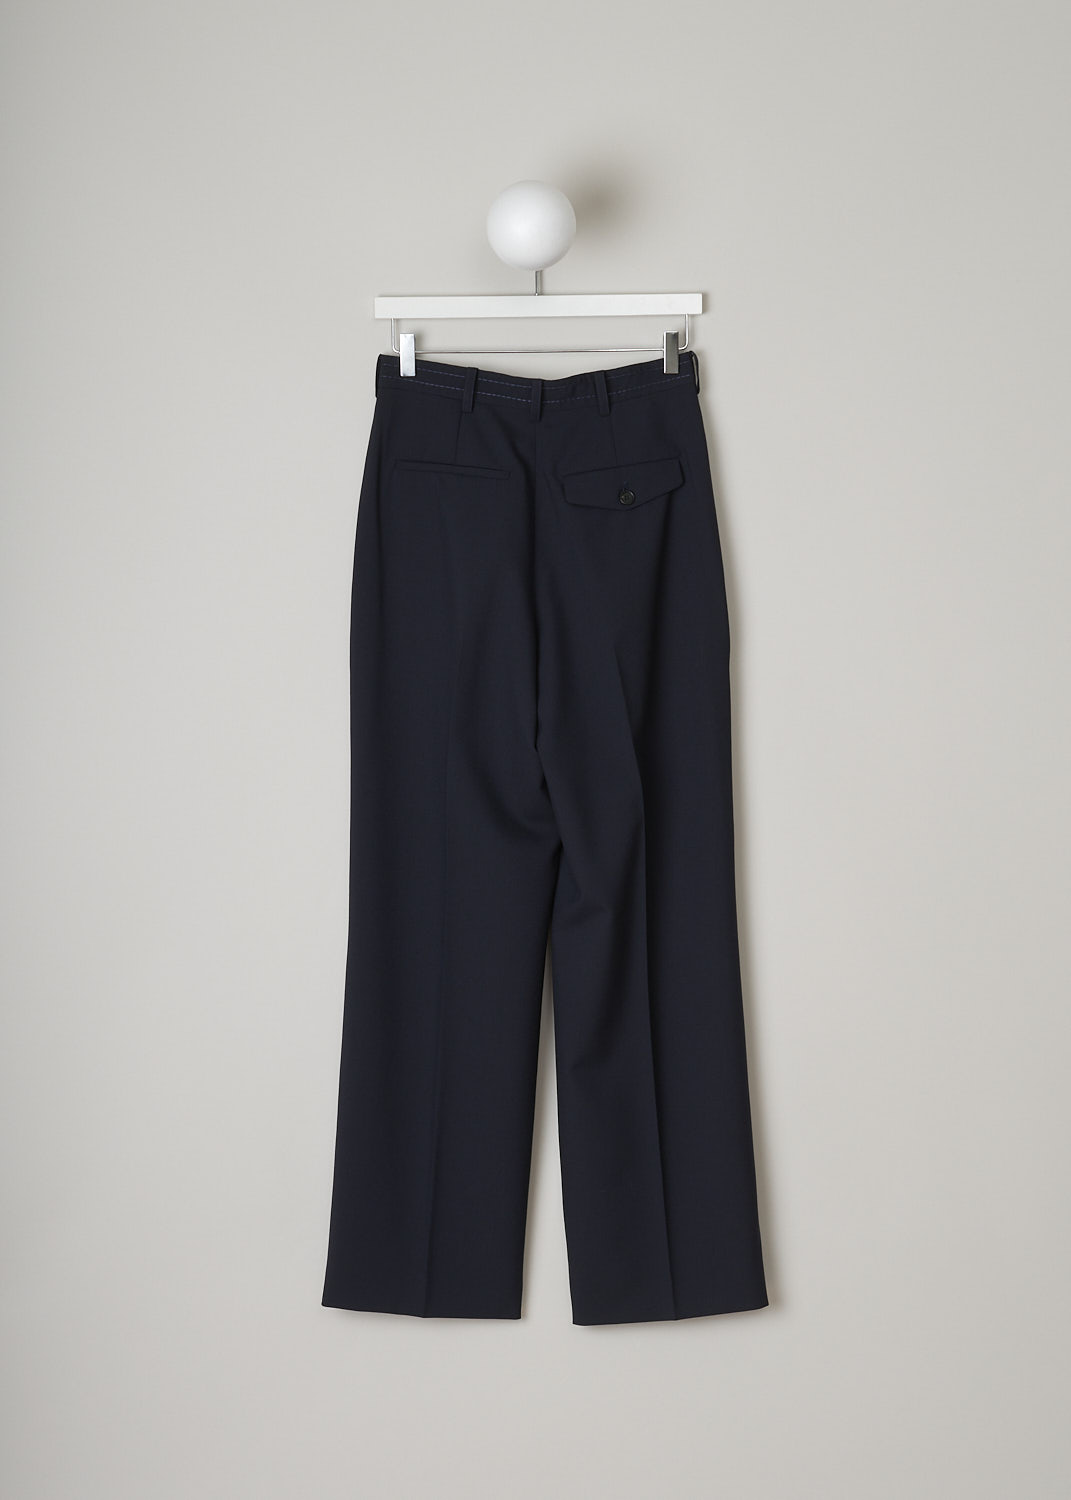 MARNI, DARK NAVY HIGH-WAISTED PANTS, PAMA0385U2_TW839_00B99, Blue, Back, These dark navy high-waisted pants have a waistband with belt loops. In the front, the brand's logo patch is attached on the waistband.
The pants has slanted welt pockets. Centre pleats run along the length of the wide pants legs. In the back, these pants have two welt pockets: one with flap and button. 
  
